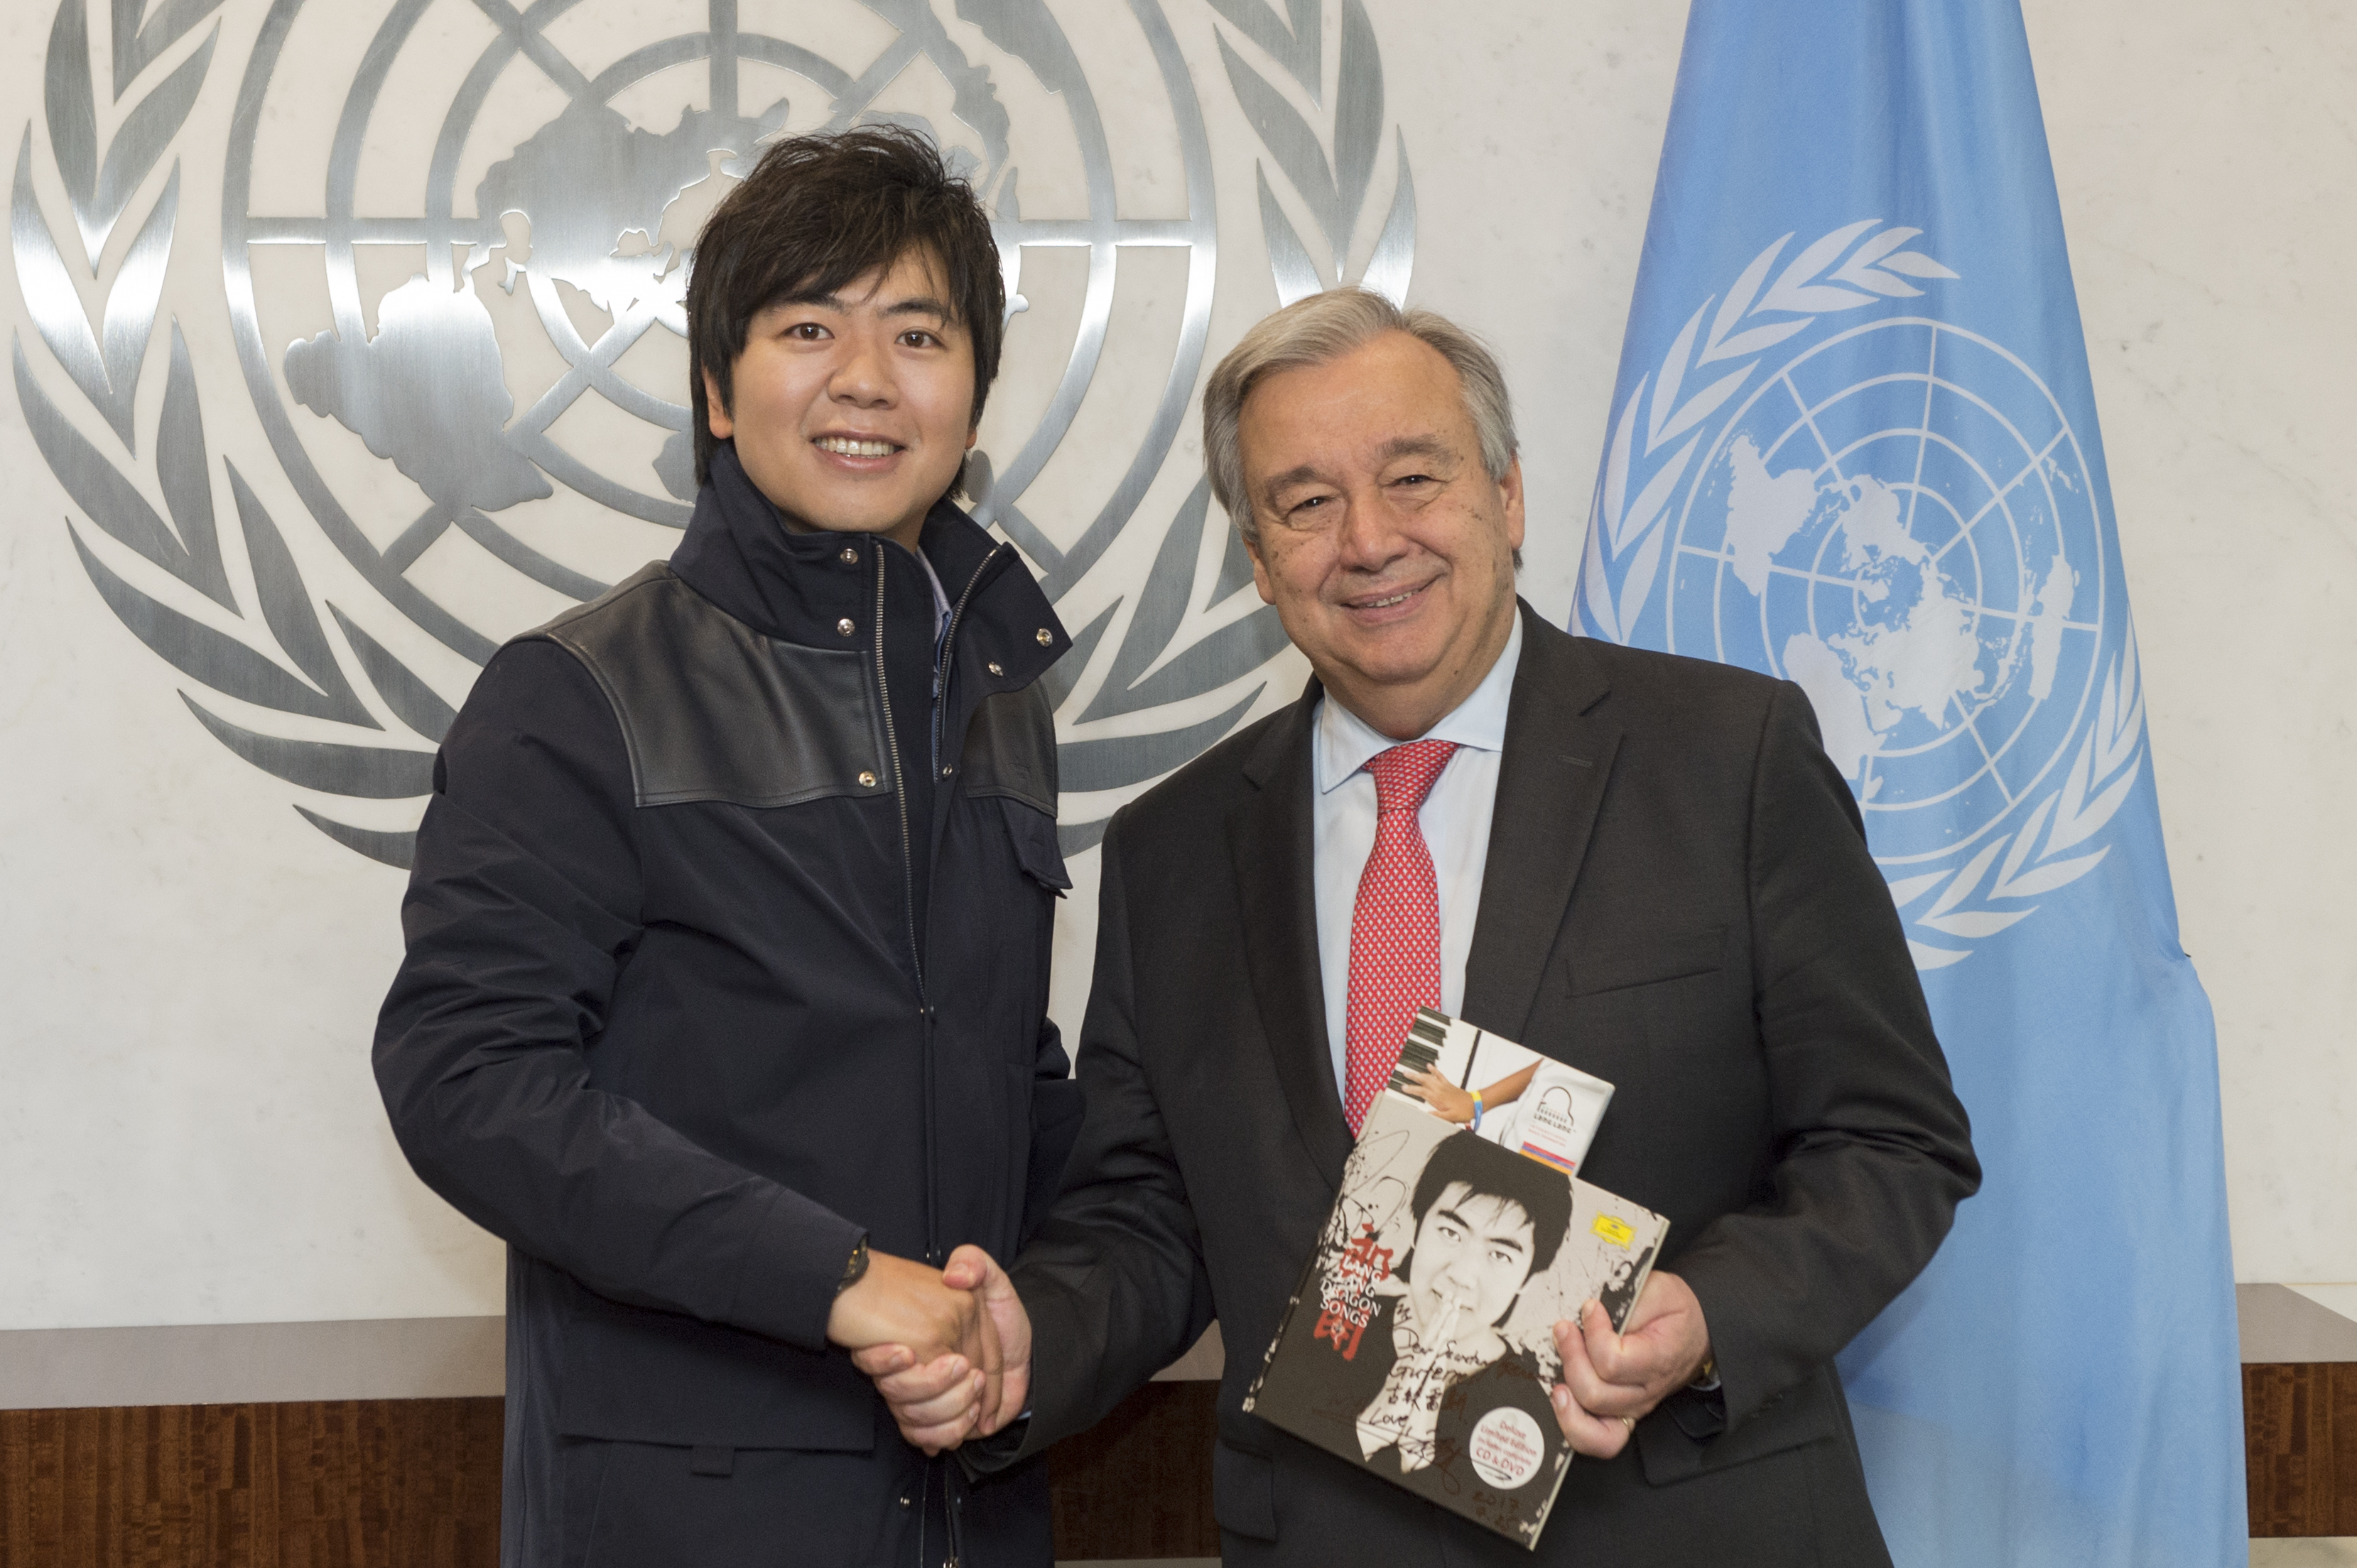 Secretary-General Antnio Guterres meets with UN Messenger of Peace and pianist Lang Lang. 25 July 2017/UN Photo/Eskinder Debebe